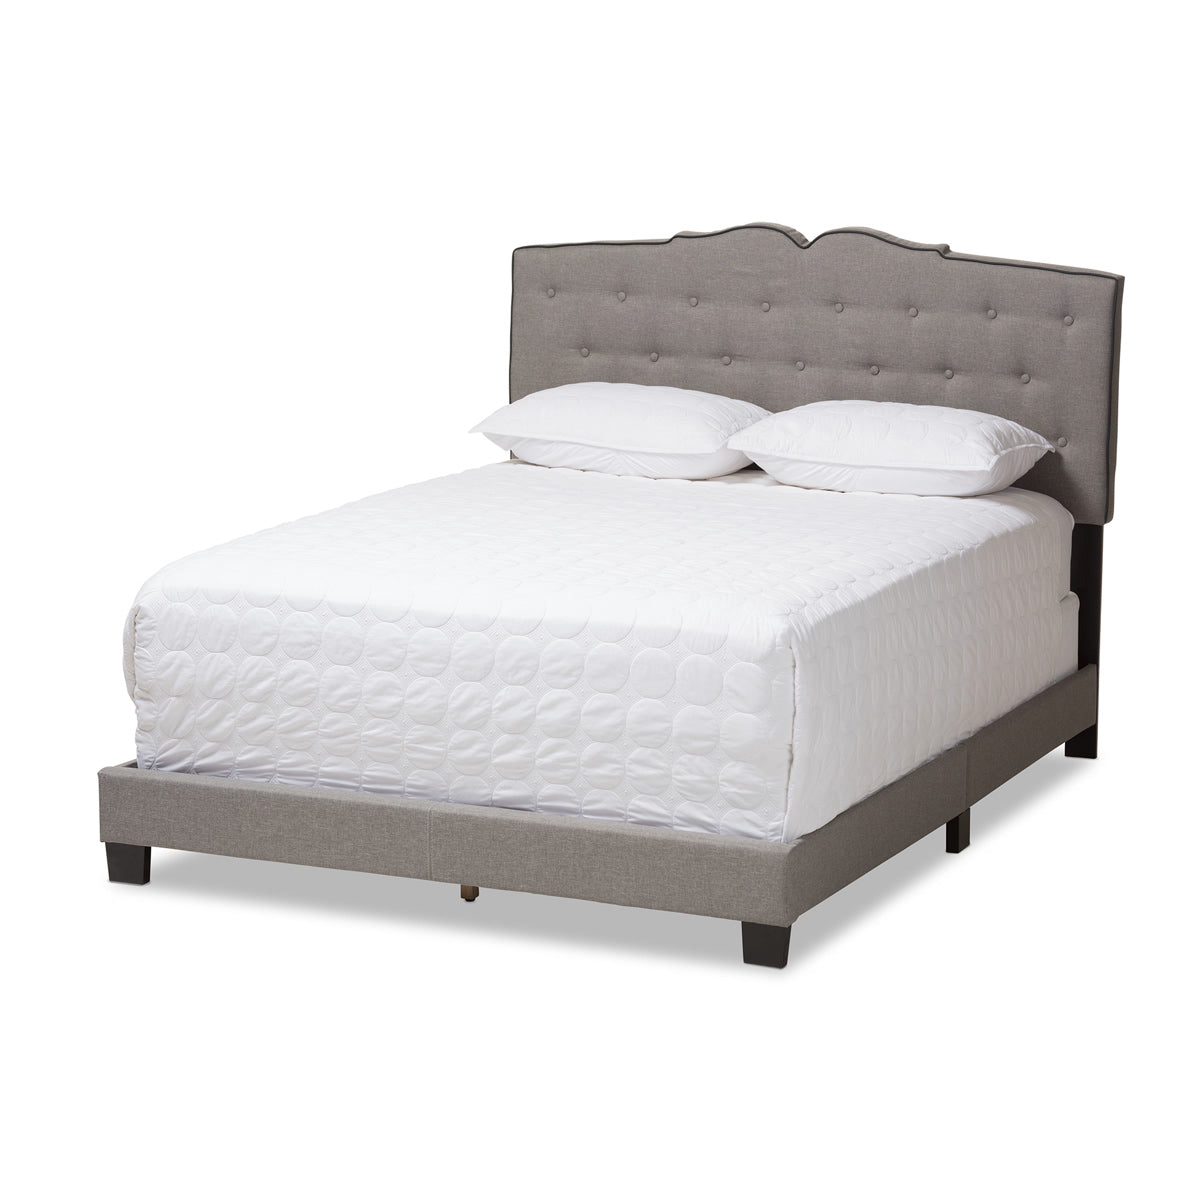 Baxton Studio Vivienne Modern and Contemporary Light Grey Fabric Upholstered Queen Size Bed Baxton Studio-0-Minimal And Modern - 1